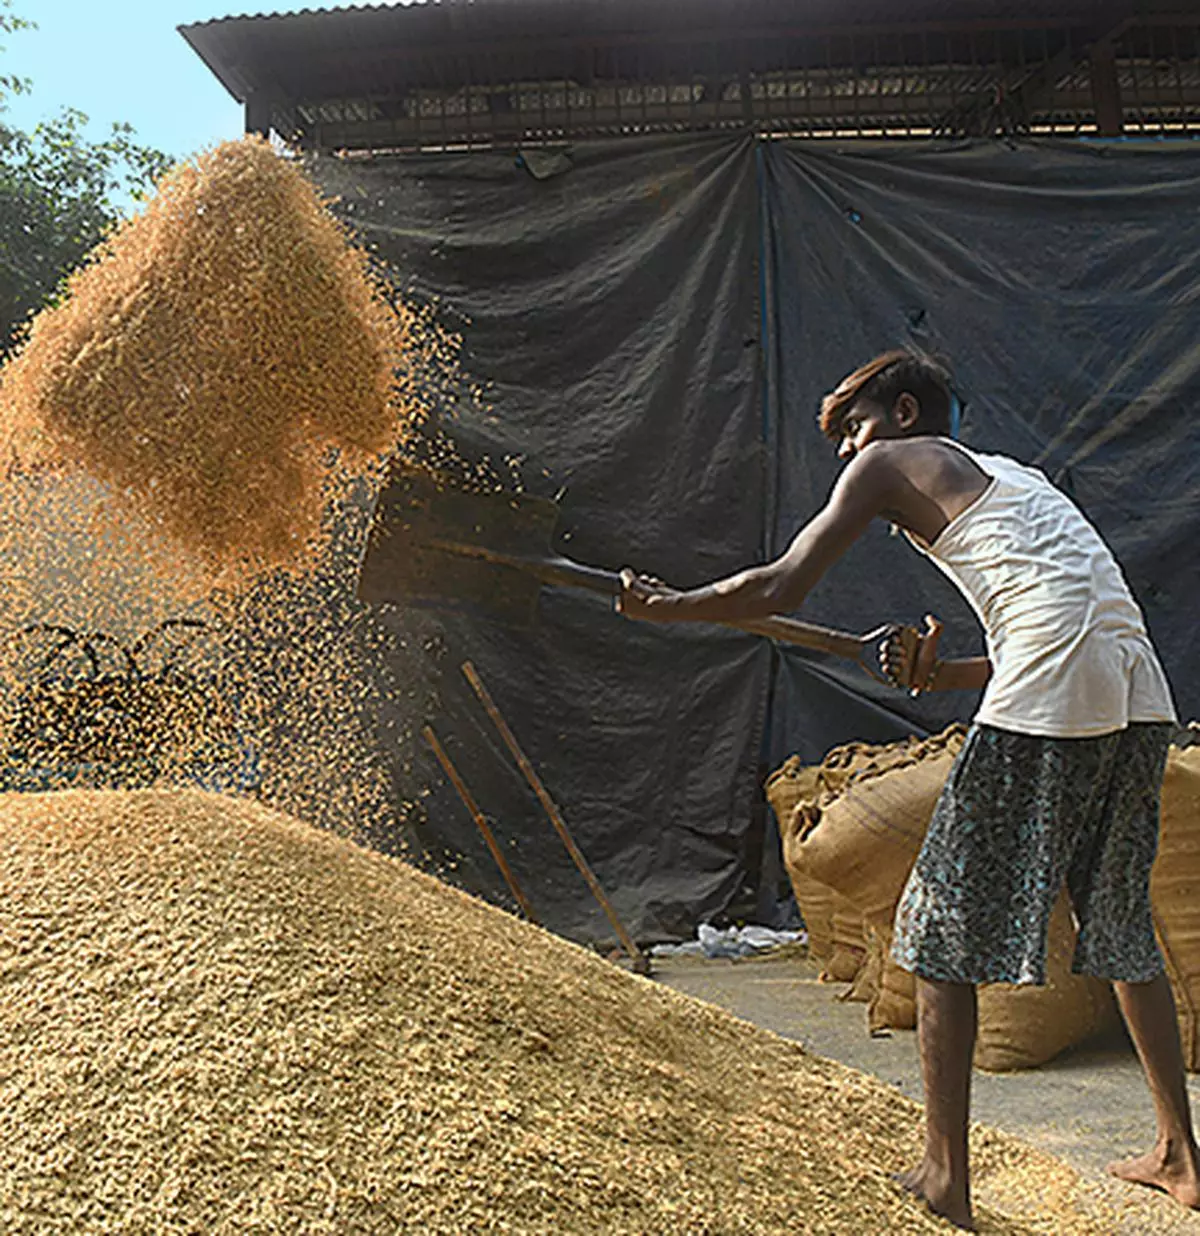 As a result of higher mandi tax, pulses processed by mills in MP such as tur dal and chana dal among others are expensive by about ₹1 per kilogram